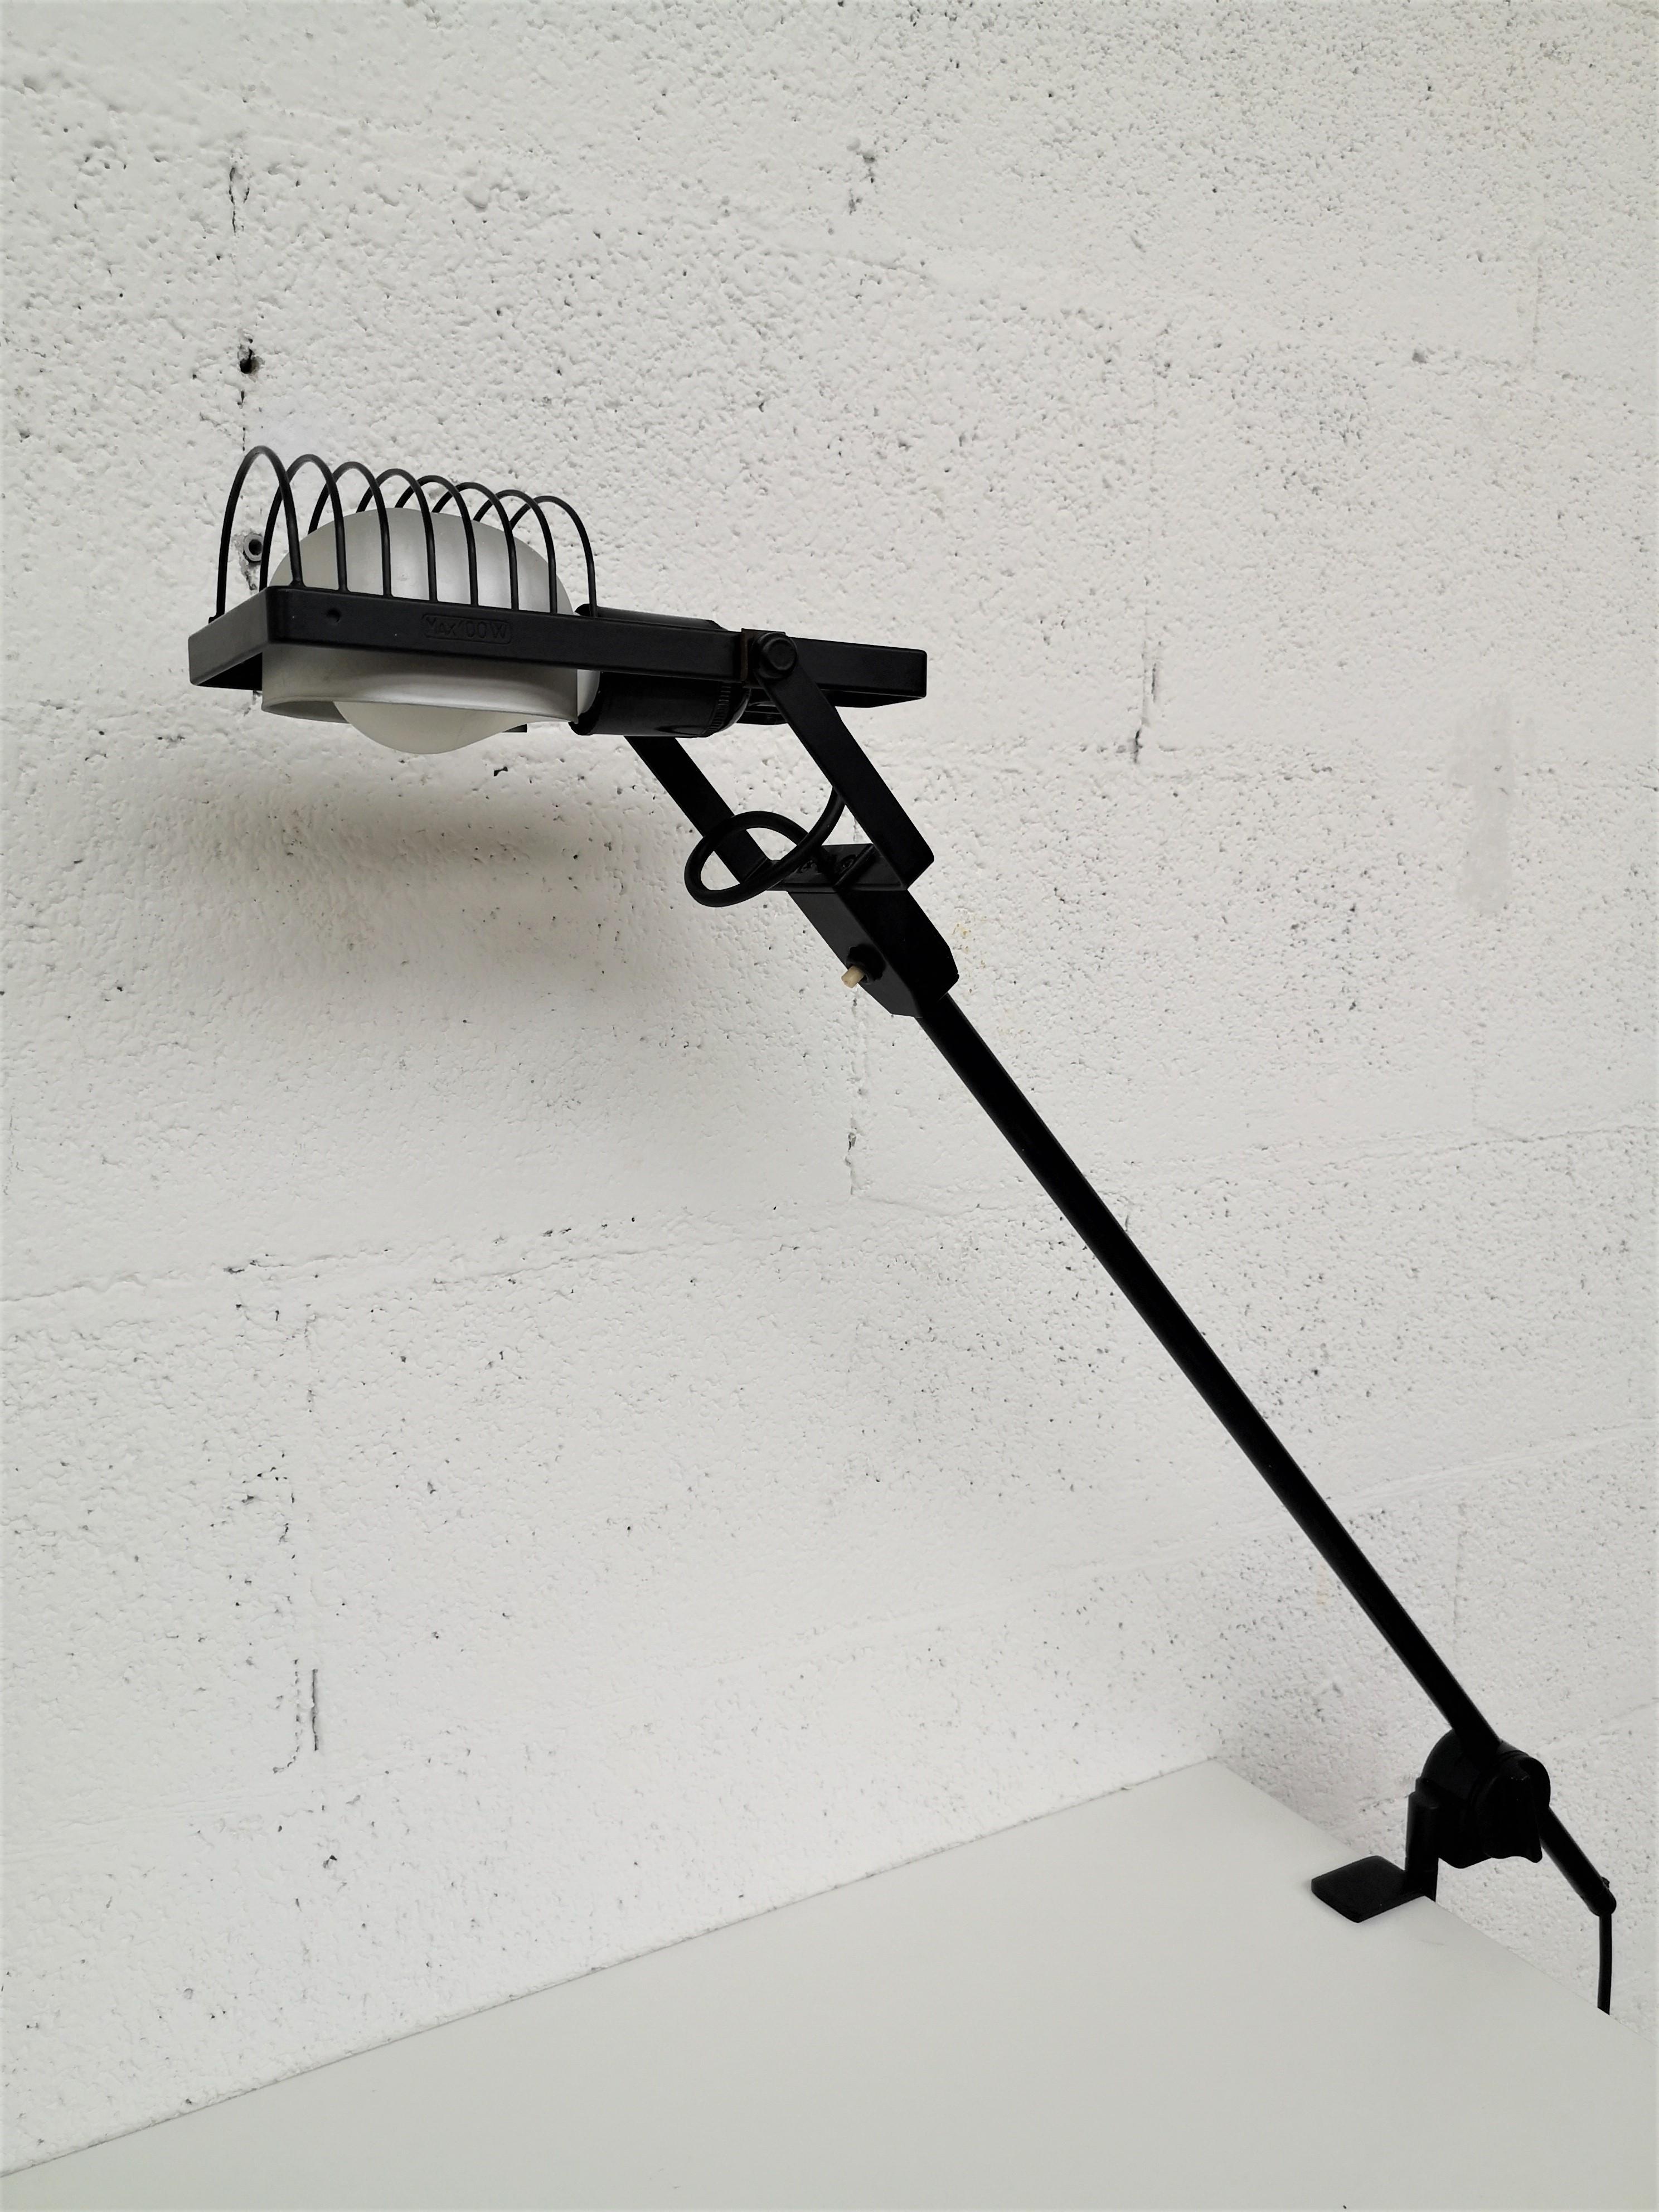 Very rare Table lamp Sintesi Morsetto designed by Ernesto Gismondi and produced by Artemide 1970s.
This is the arm version with clamp for fixing.
Painted metal structure, aluminum diffuser

Founded in 1960s, Artemide is one of the most known